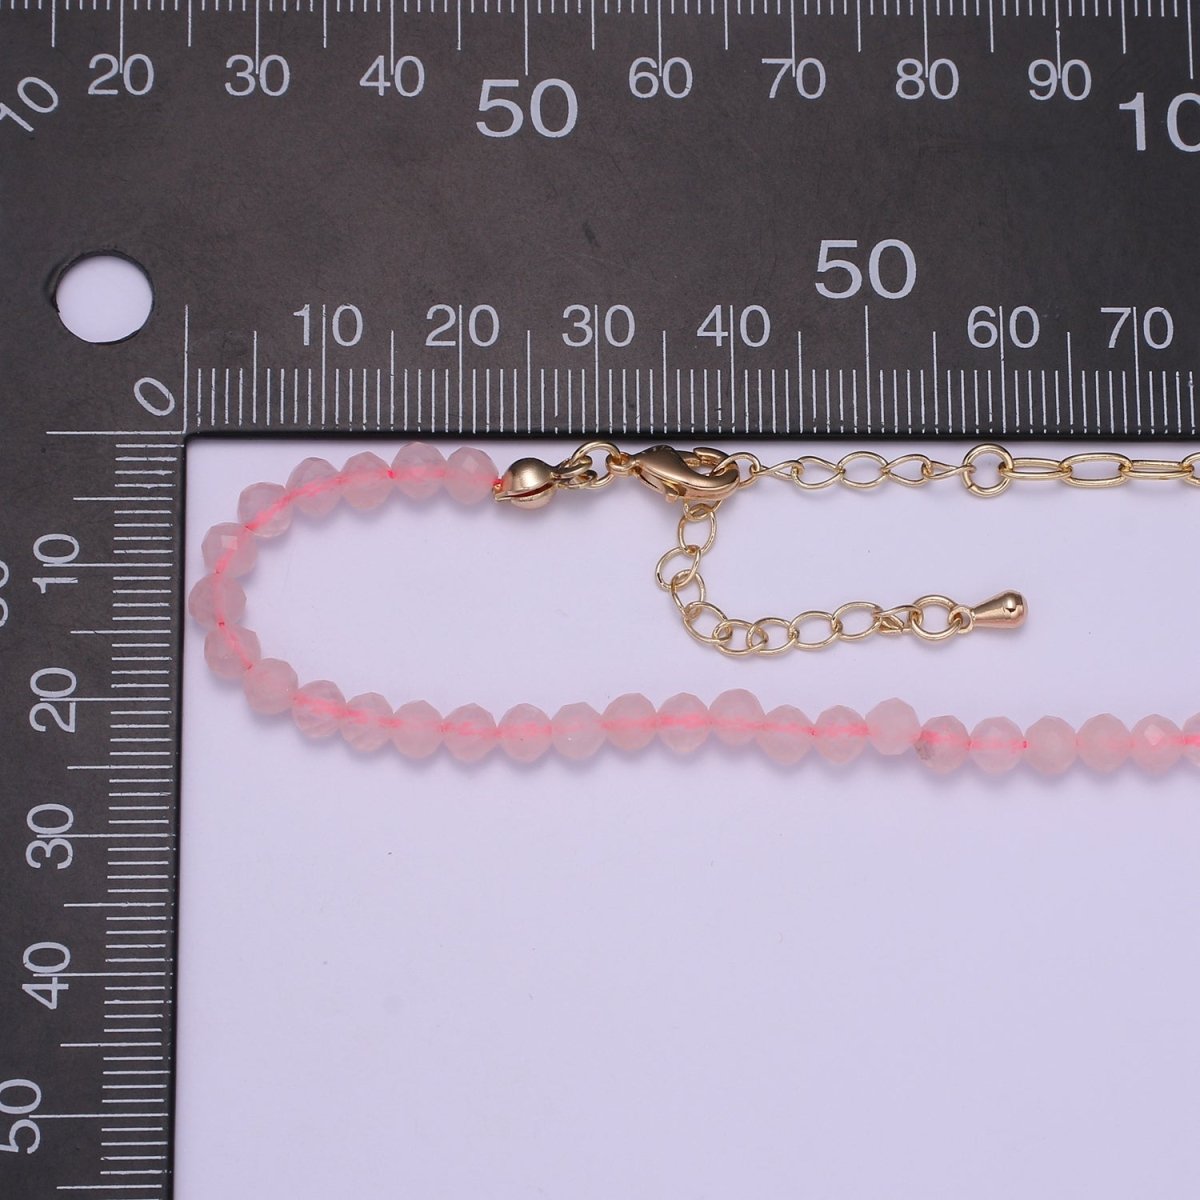 Half 14K Gold Filled Cable Link Chain, Half Dainty Pink Quartz Natural Gemstone Necklace | WA-029 Clearance Pricing - DLUXCA